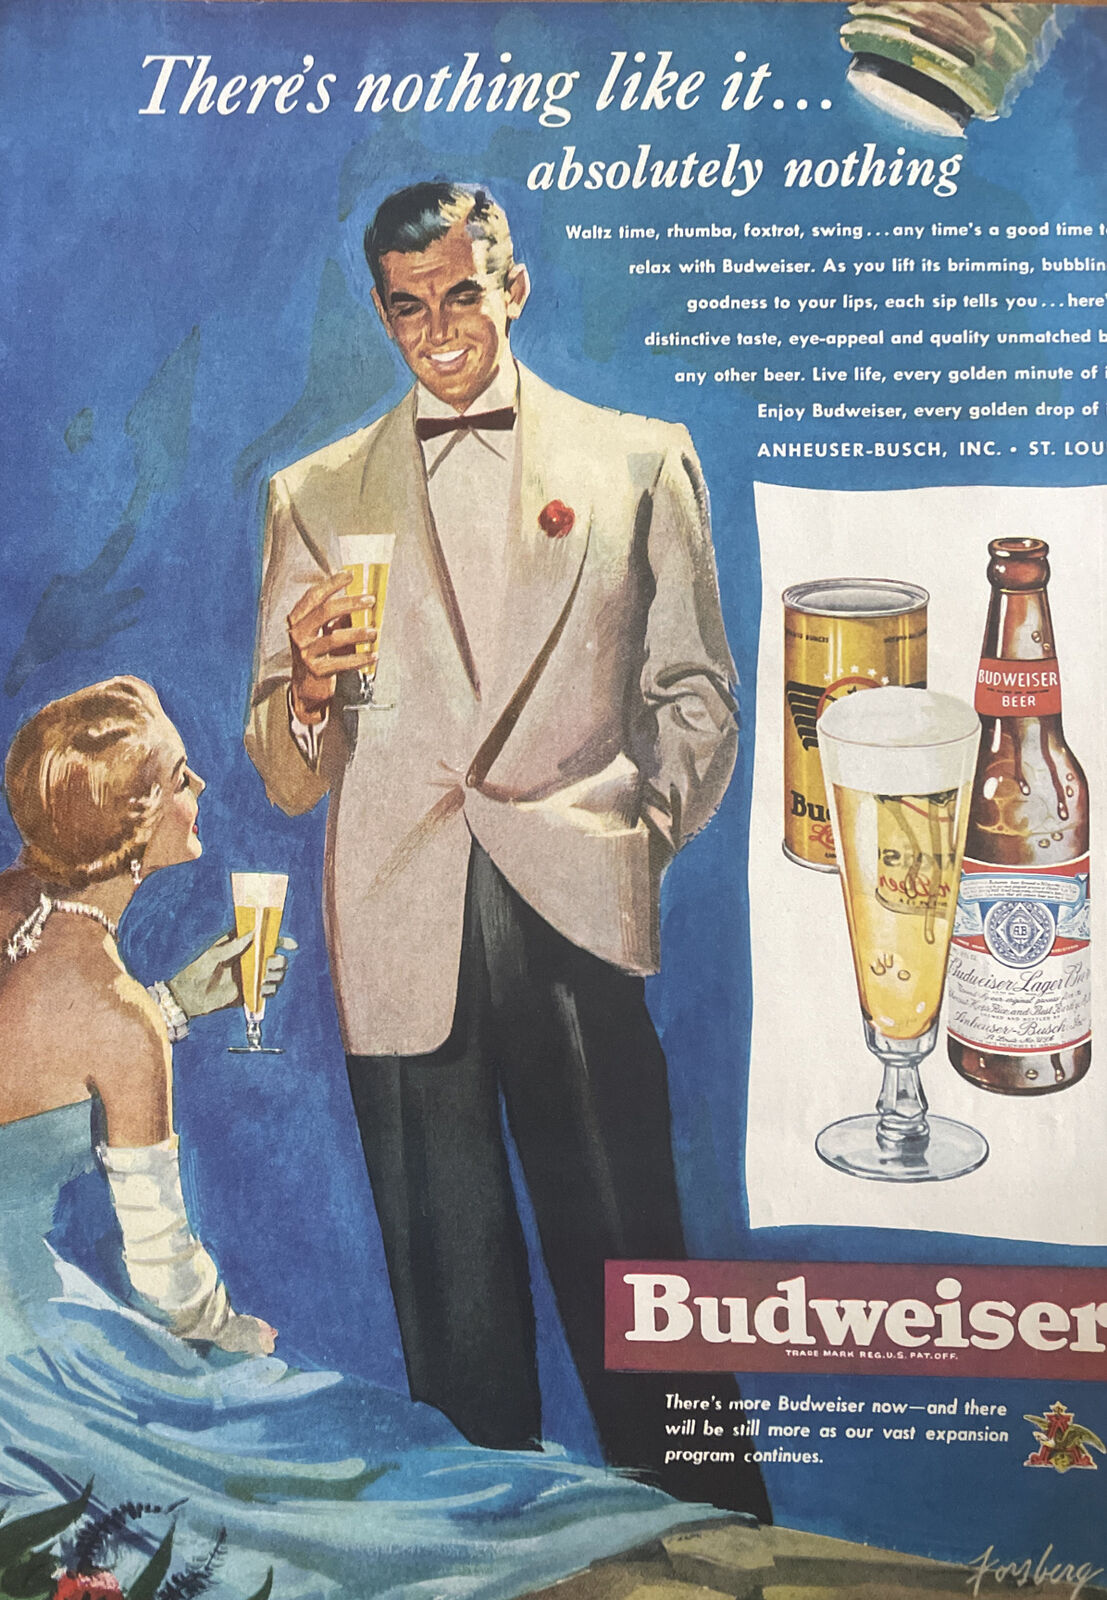 1949 vintage Budweiser print ad. There’s Nothing Like it… Absolutely Nothing